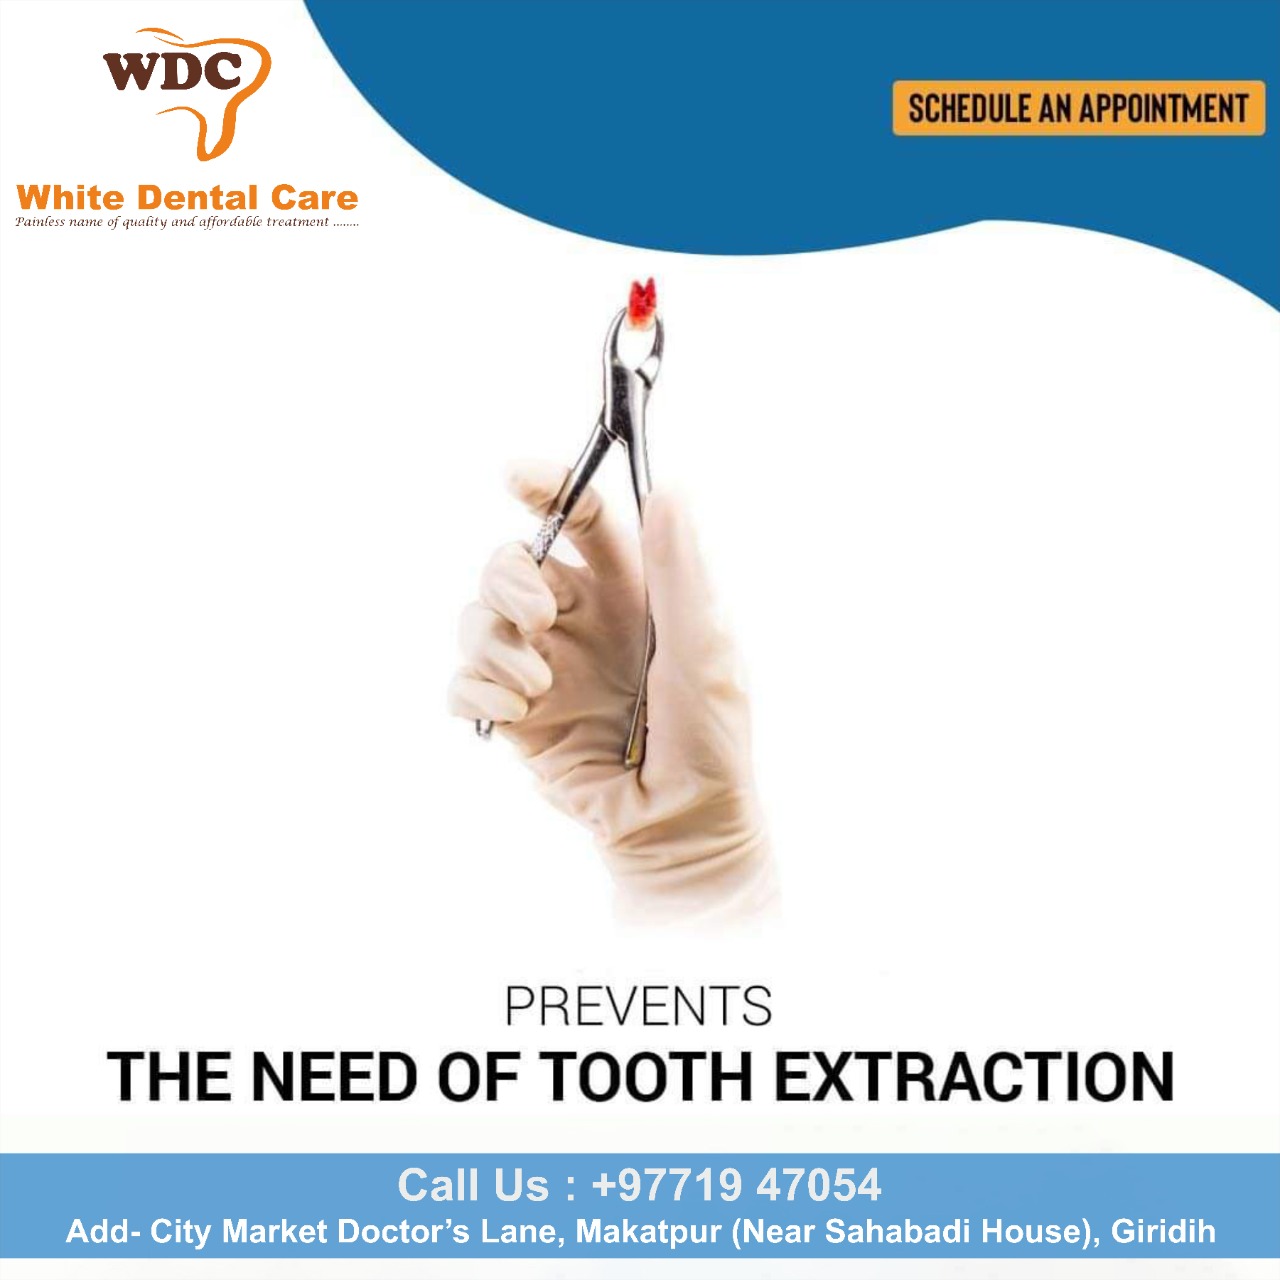 The Need of Tooth Extraction